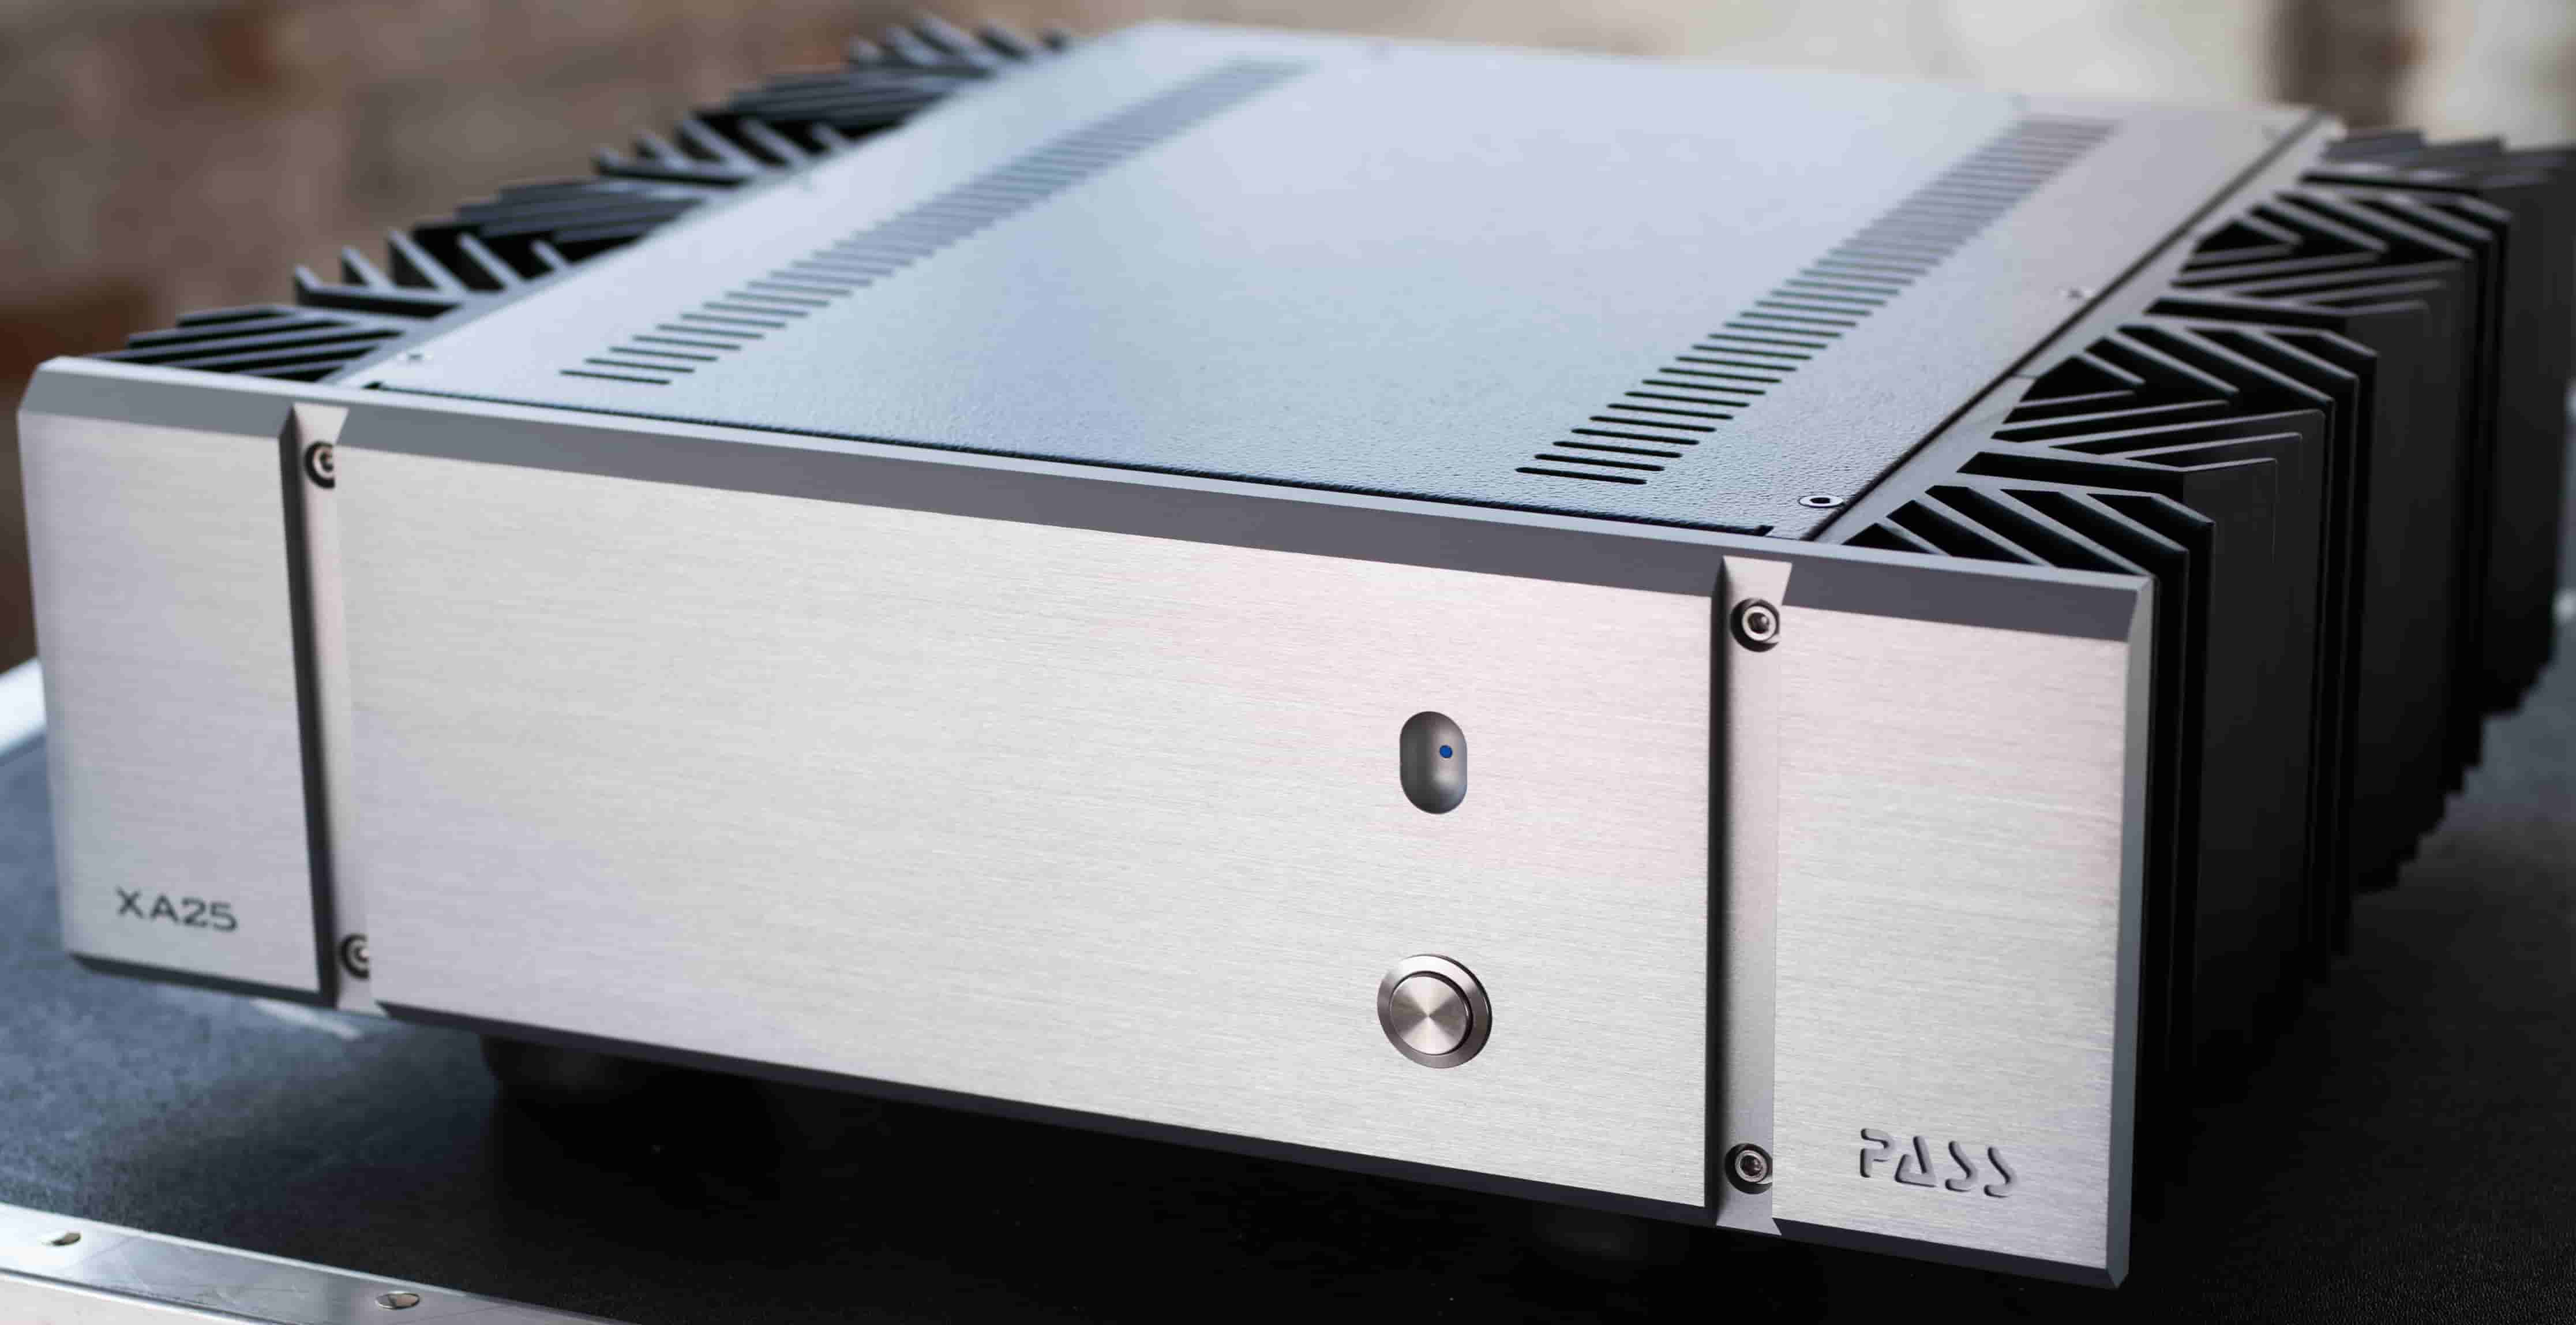 4 Major Specifications To Be Considered When Buying an Amplifier